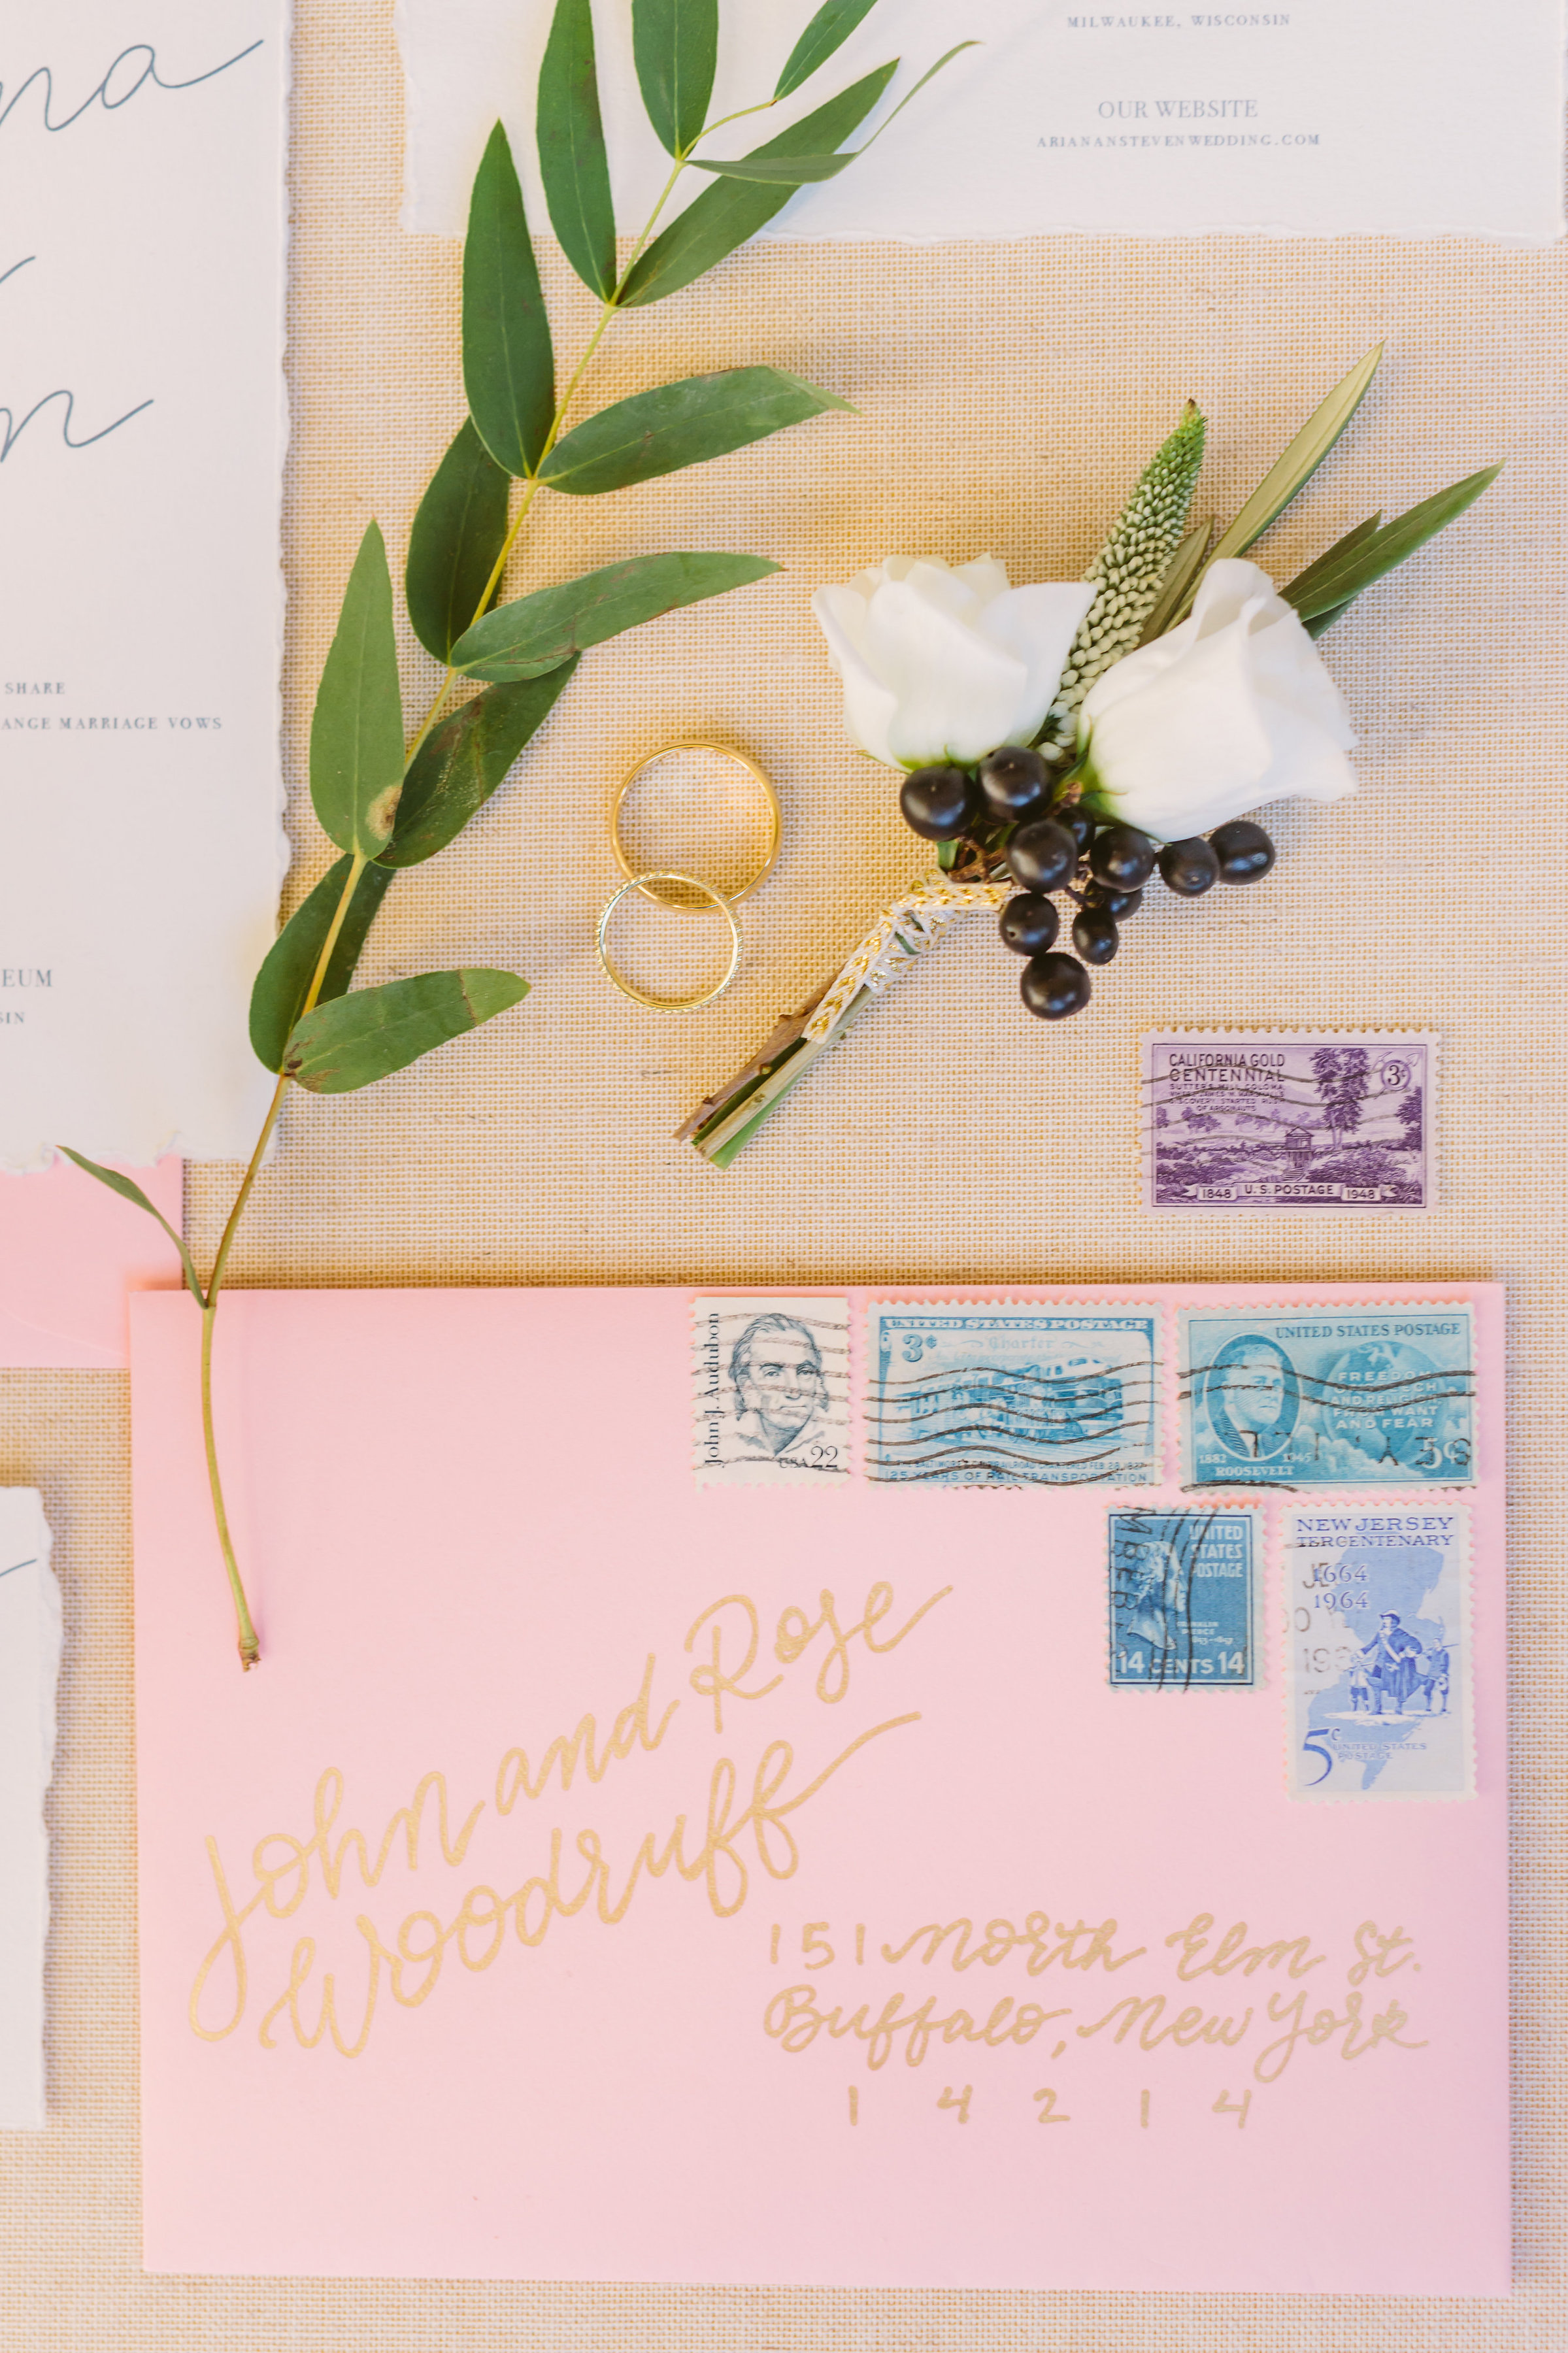 Pink and Gold Wedding Invitations